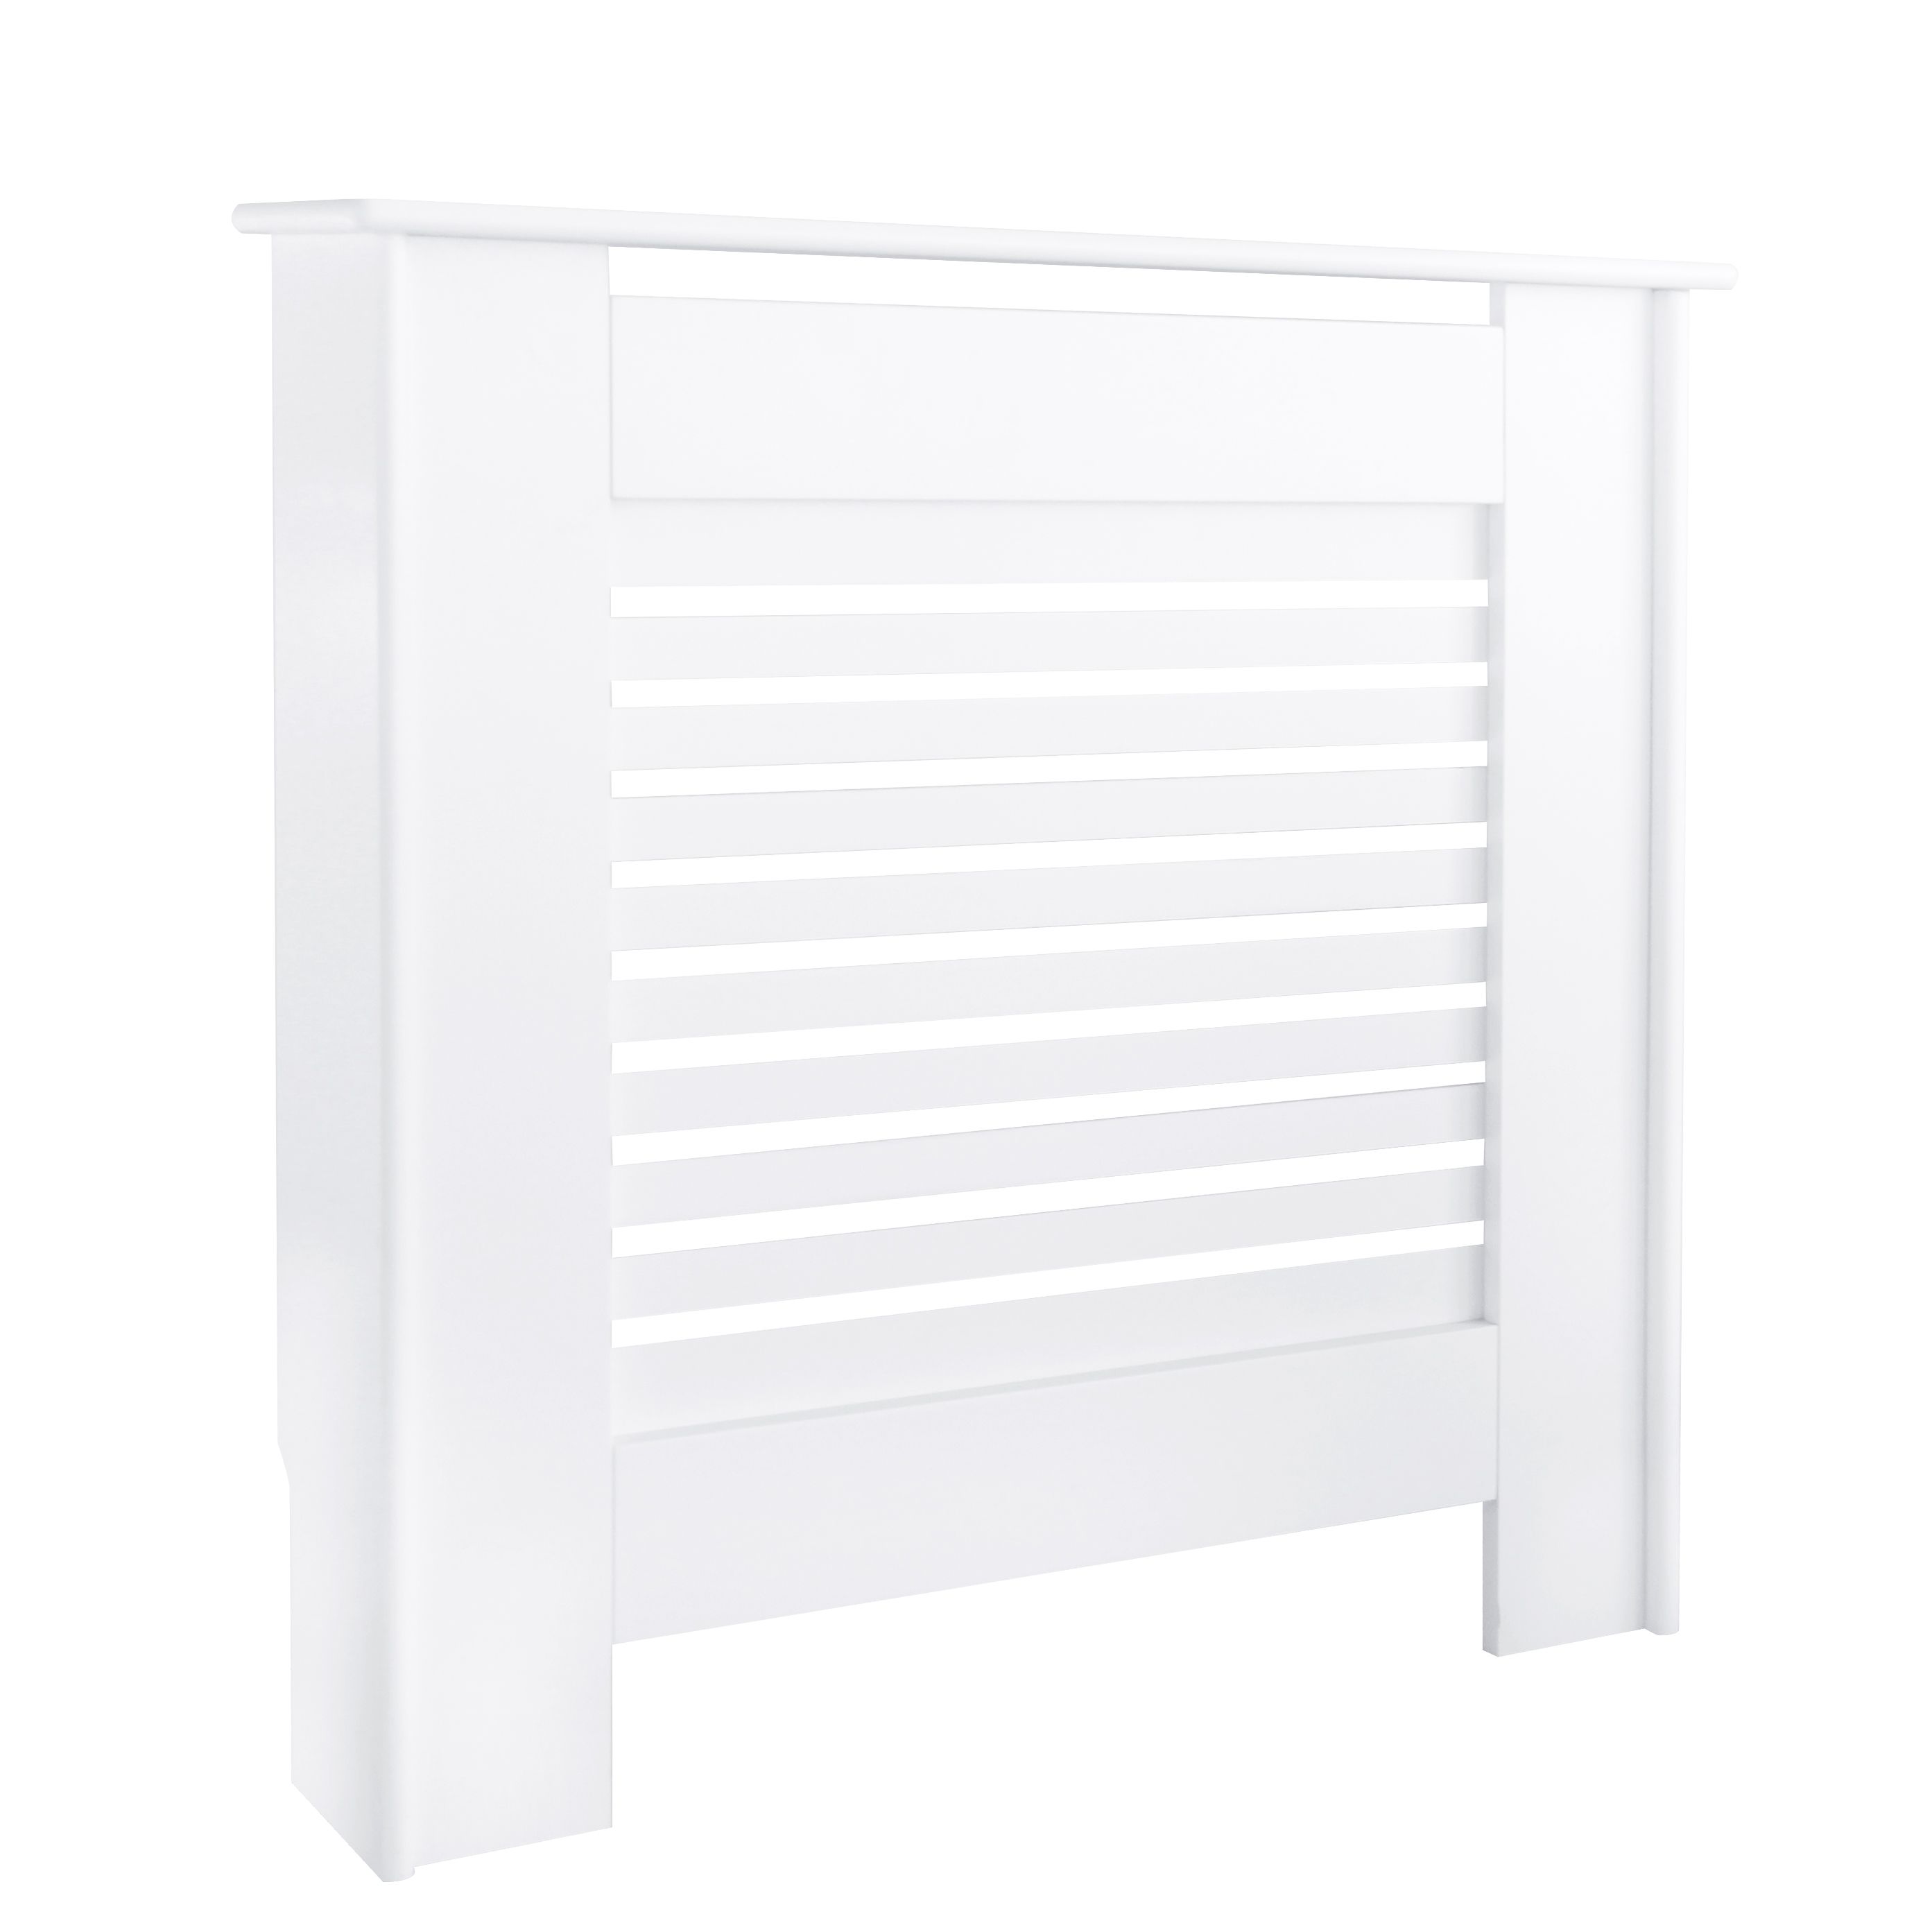 New suffolk Mini White Radiator cover 797mm(H) 780mm(W) 180mm(D)